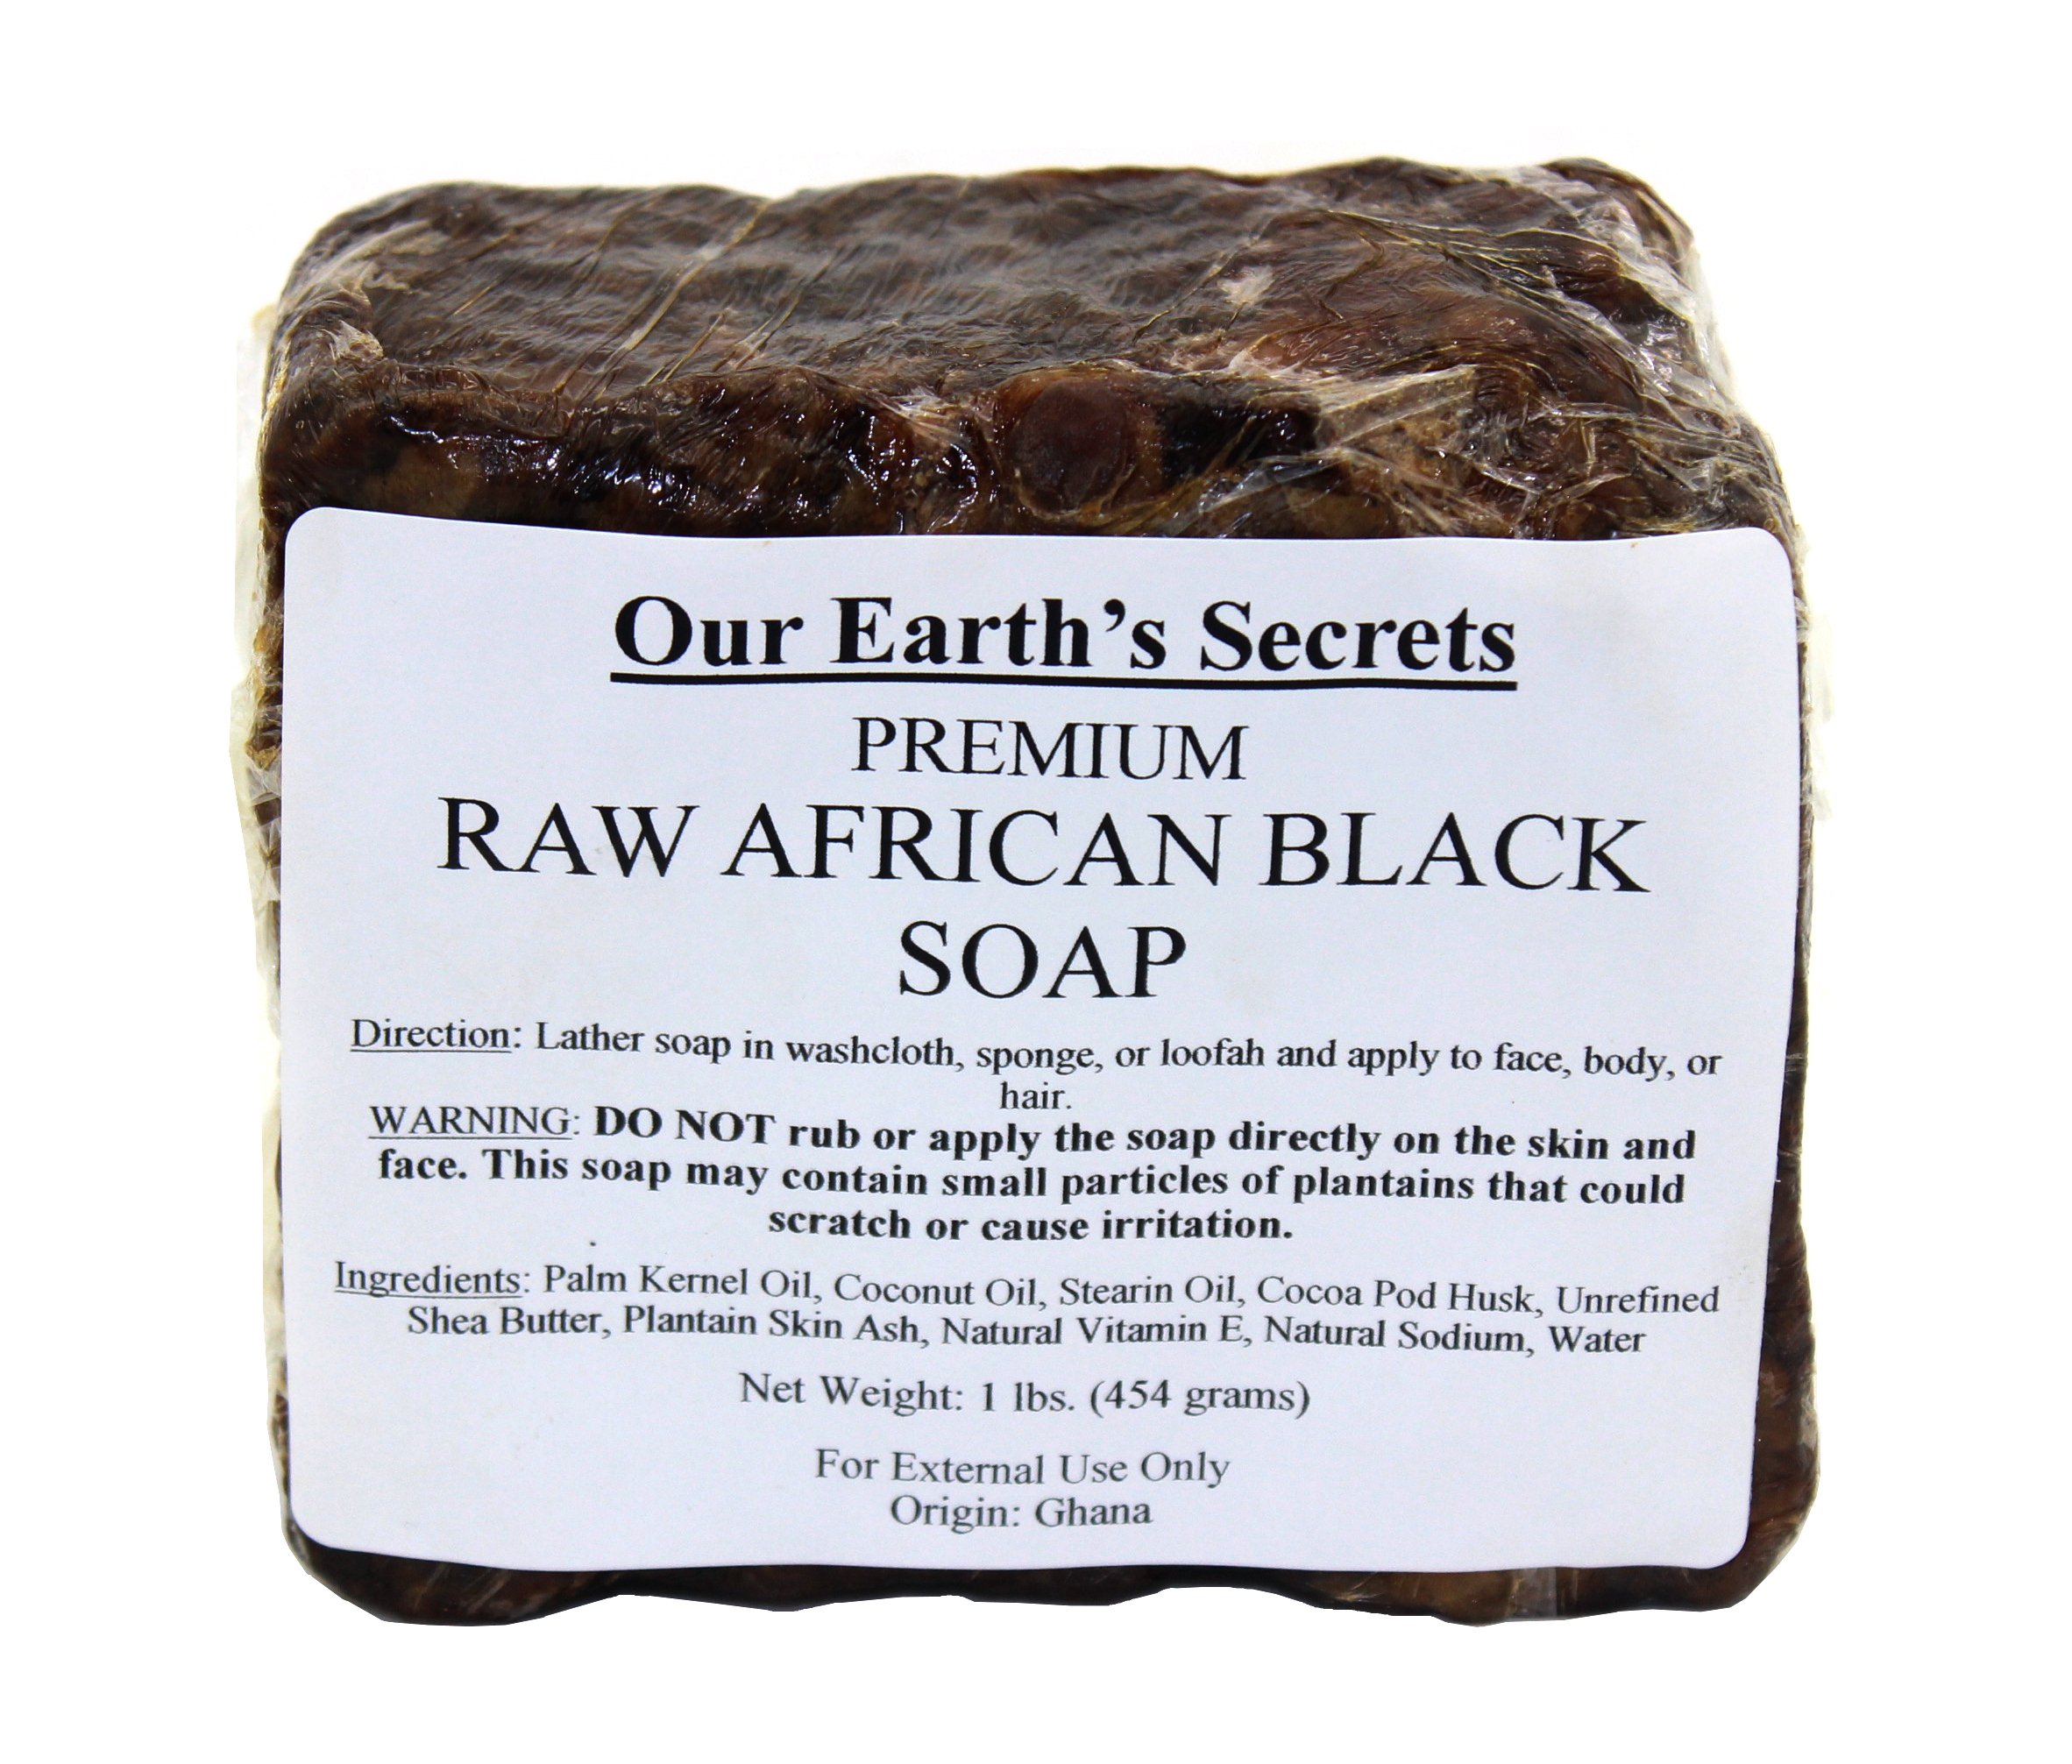 Our Earth's Secrets Raw African Black Soap, 1 lb.